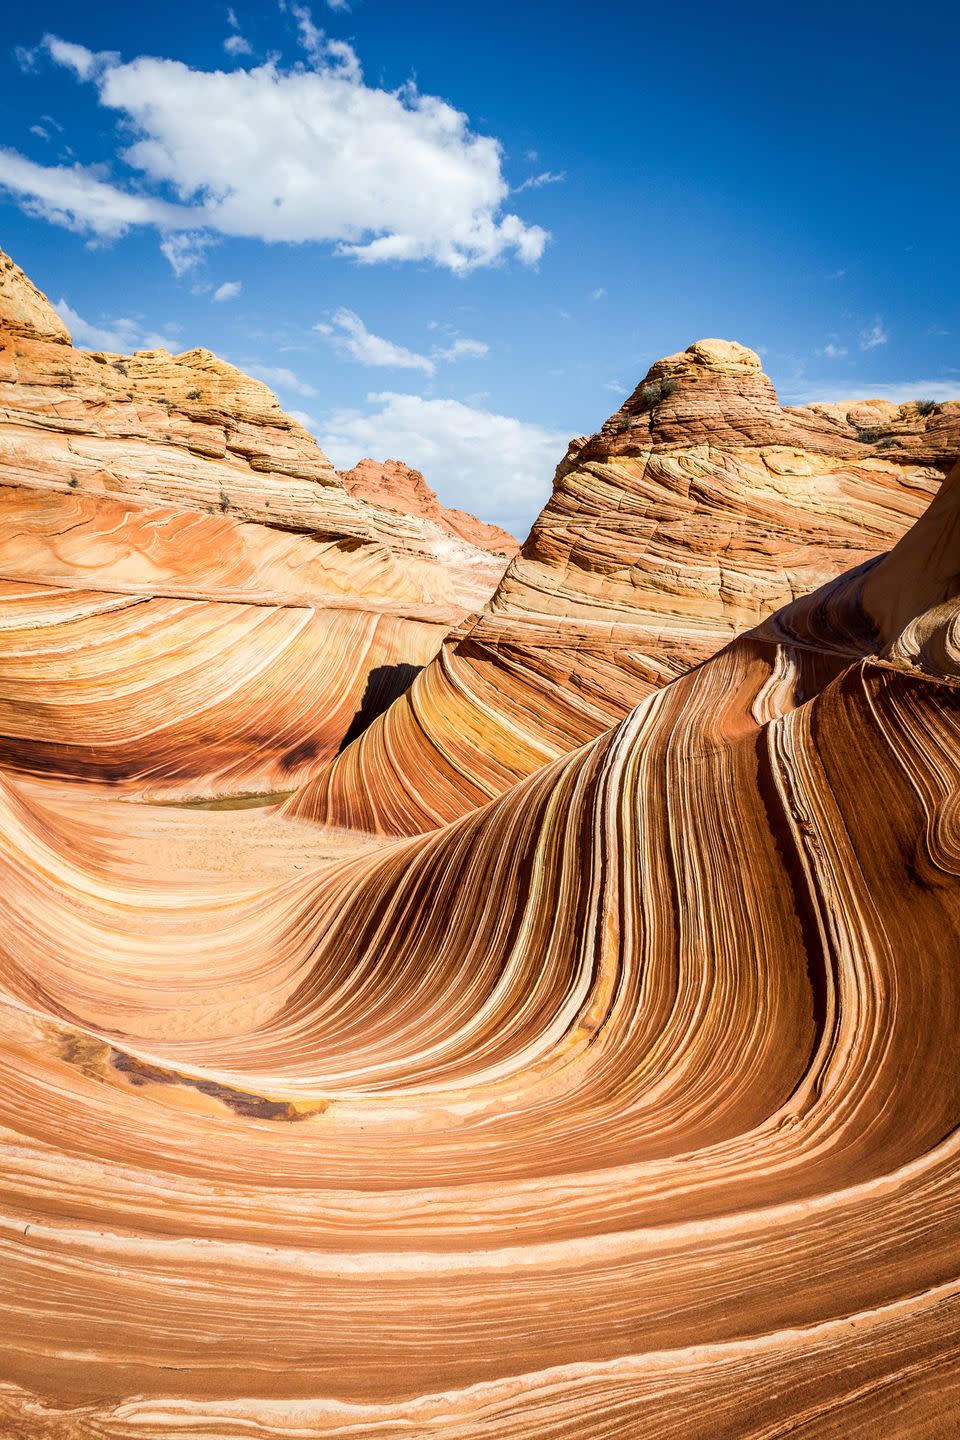 America's Most Beautiful Rock Formation